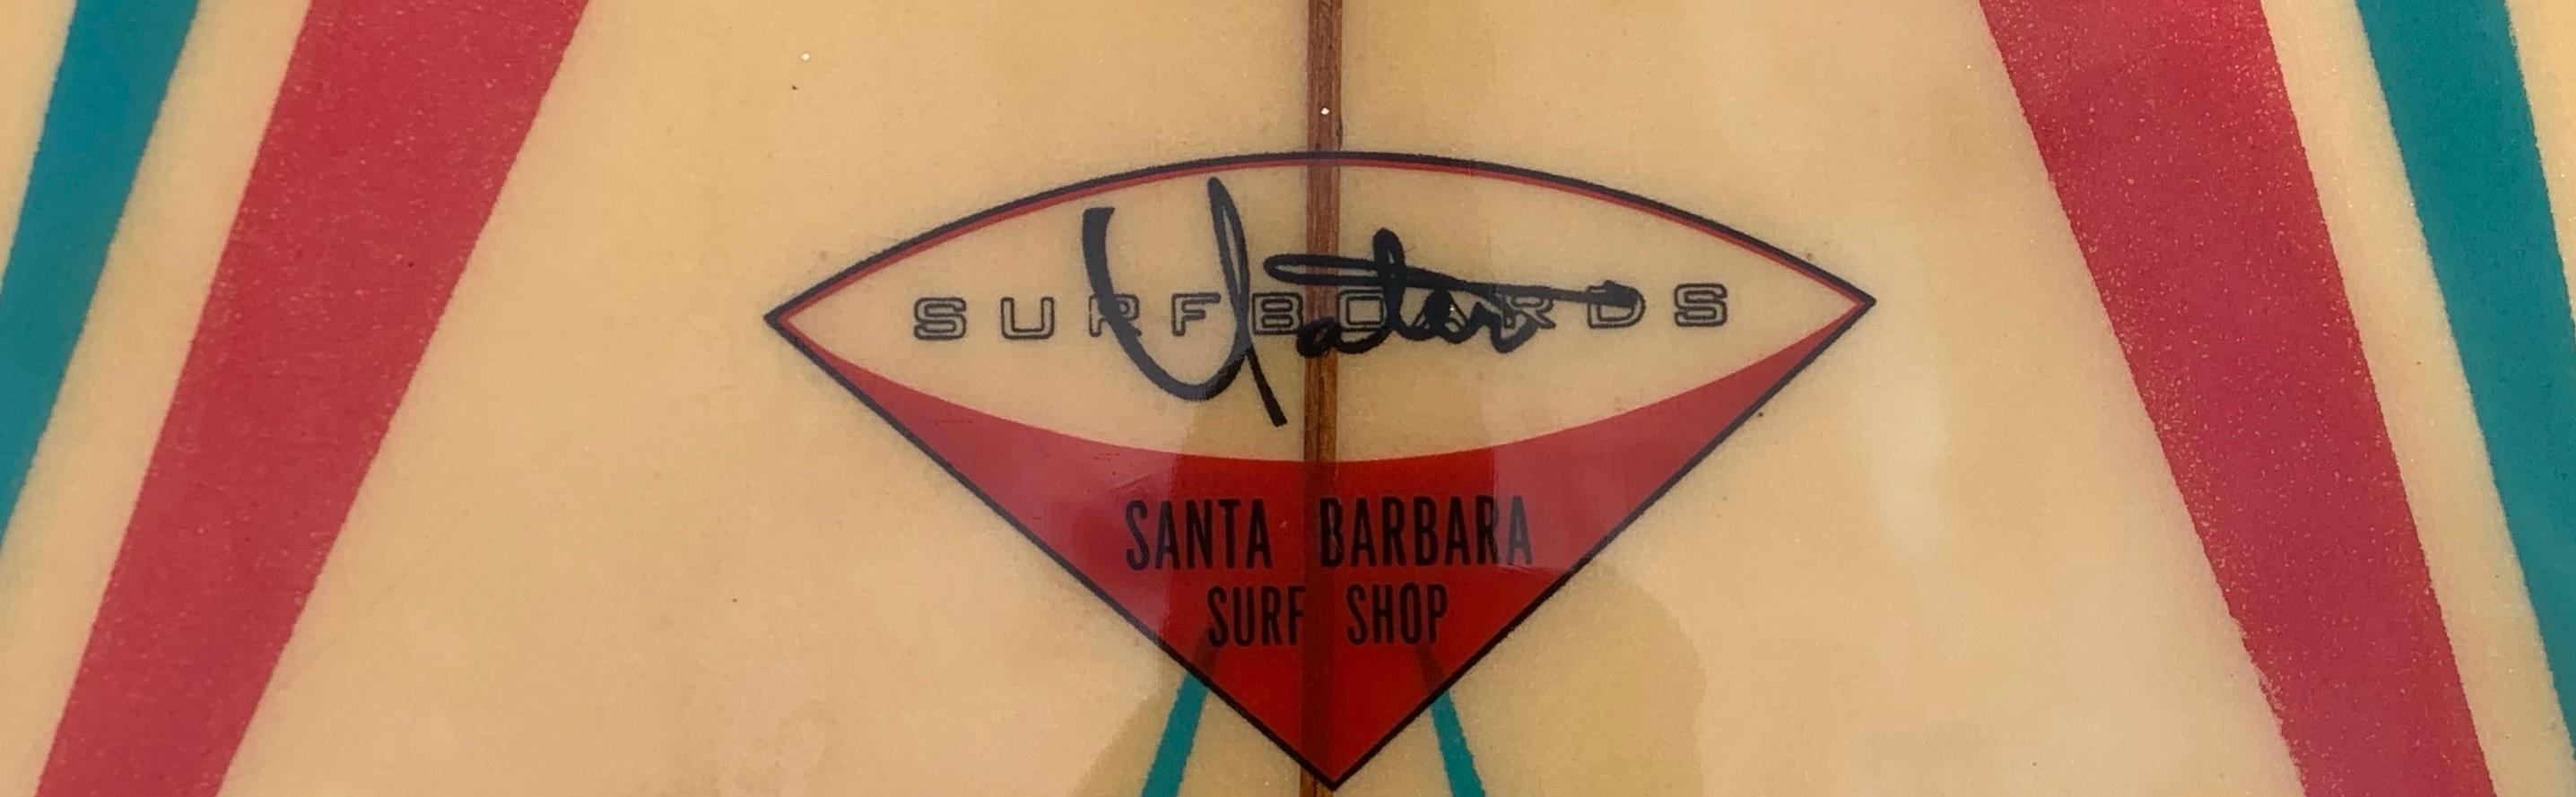 yater surfboard for sale